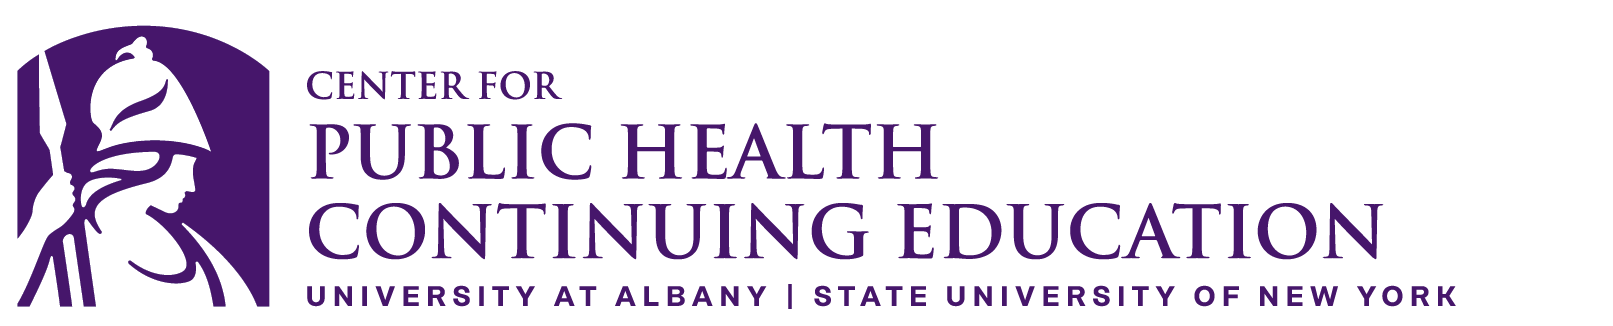 Center for Public Health Continuing Education University at Albany State University at New York